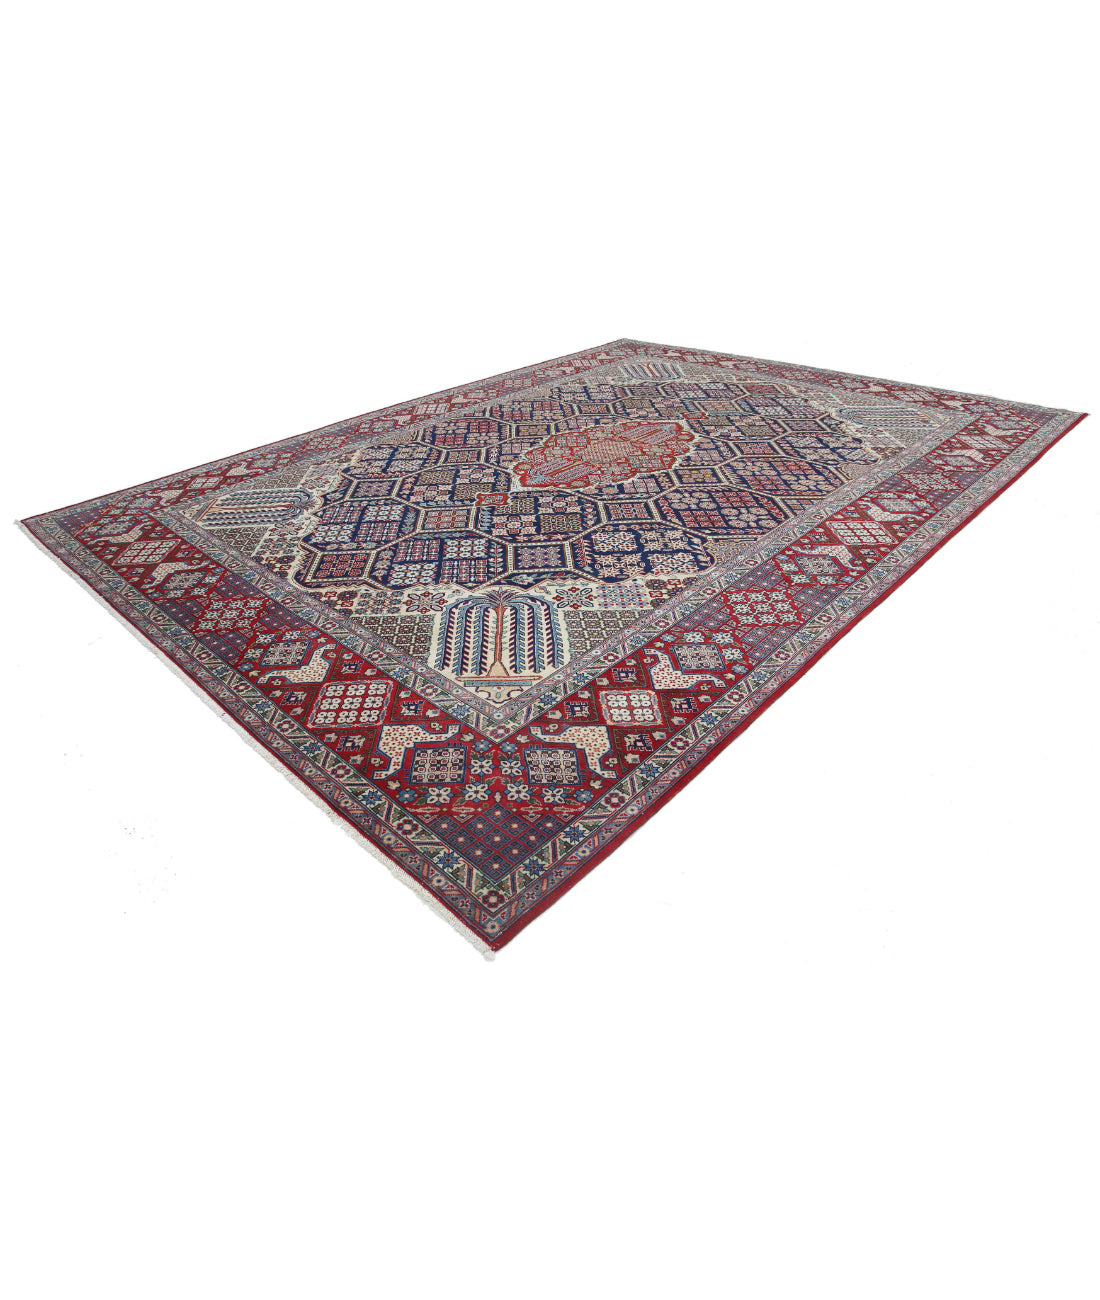 Hand Knotted Persian Tabriz Wool Rug - 10'6'' x 14'5'' 10'6'' x 14'5'' (315 X 433) / Blue / Red